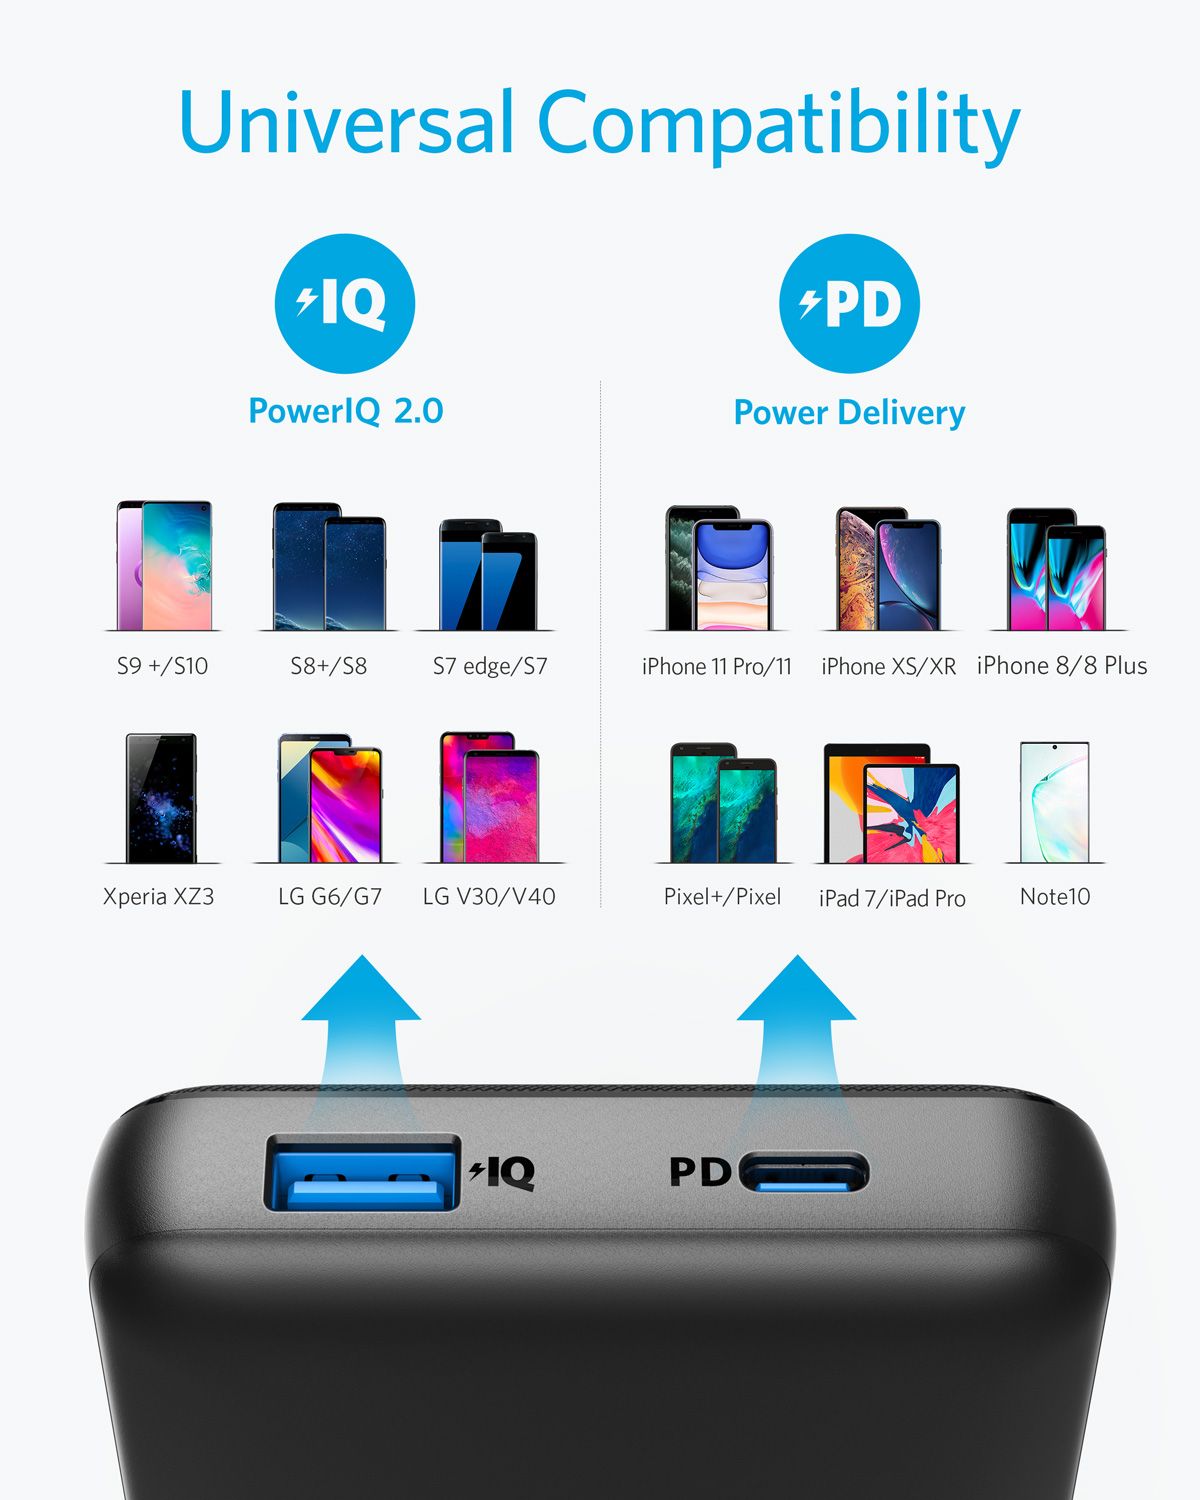 Anker PowerCore Essential 20K PD